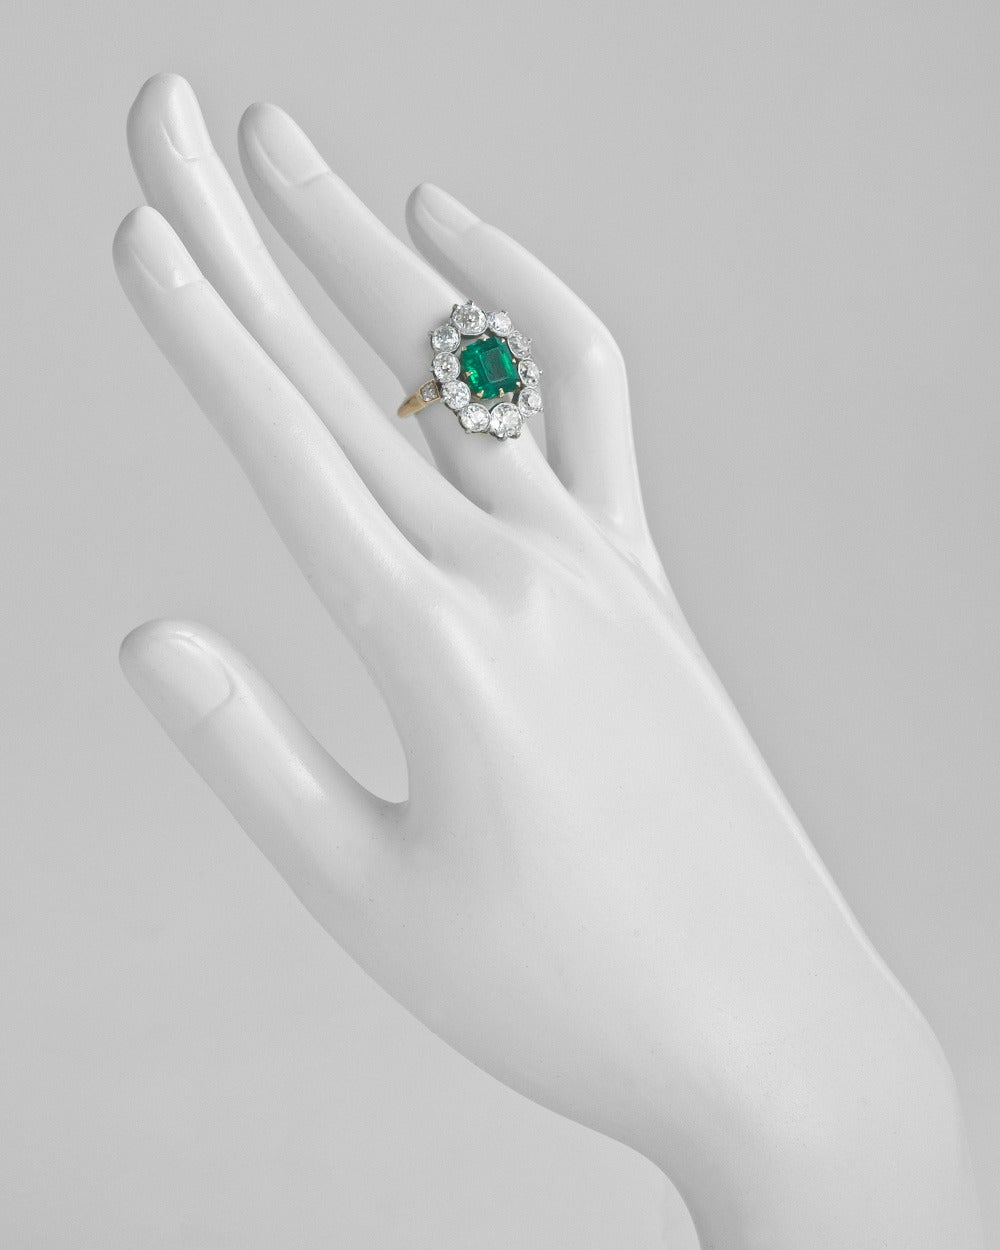 Victorian emerald and diamond cluster ring, centering on a natural square emerald-cut emerald weighing 2.20 carats (AGL-certified: of Colombian origin, non-treated), accented by a graduated old mine cut diamond surround with smaller old mine cut